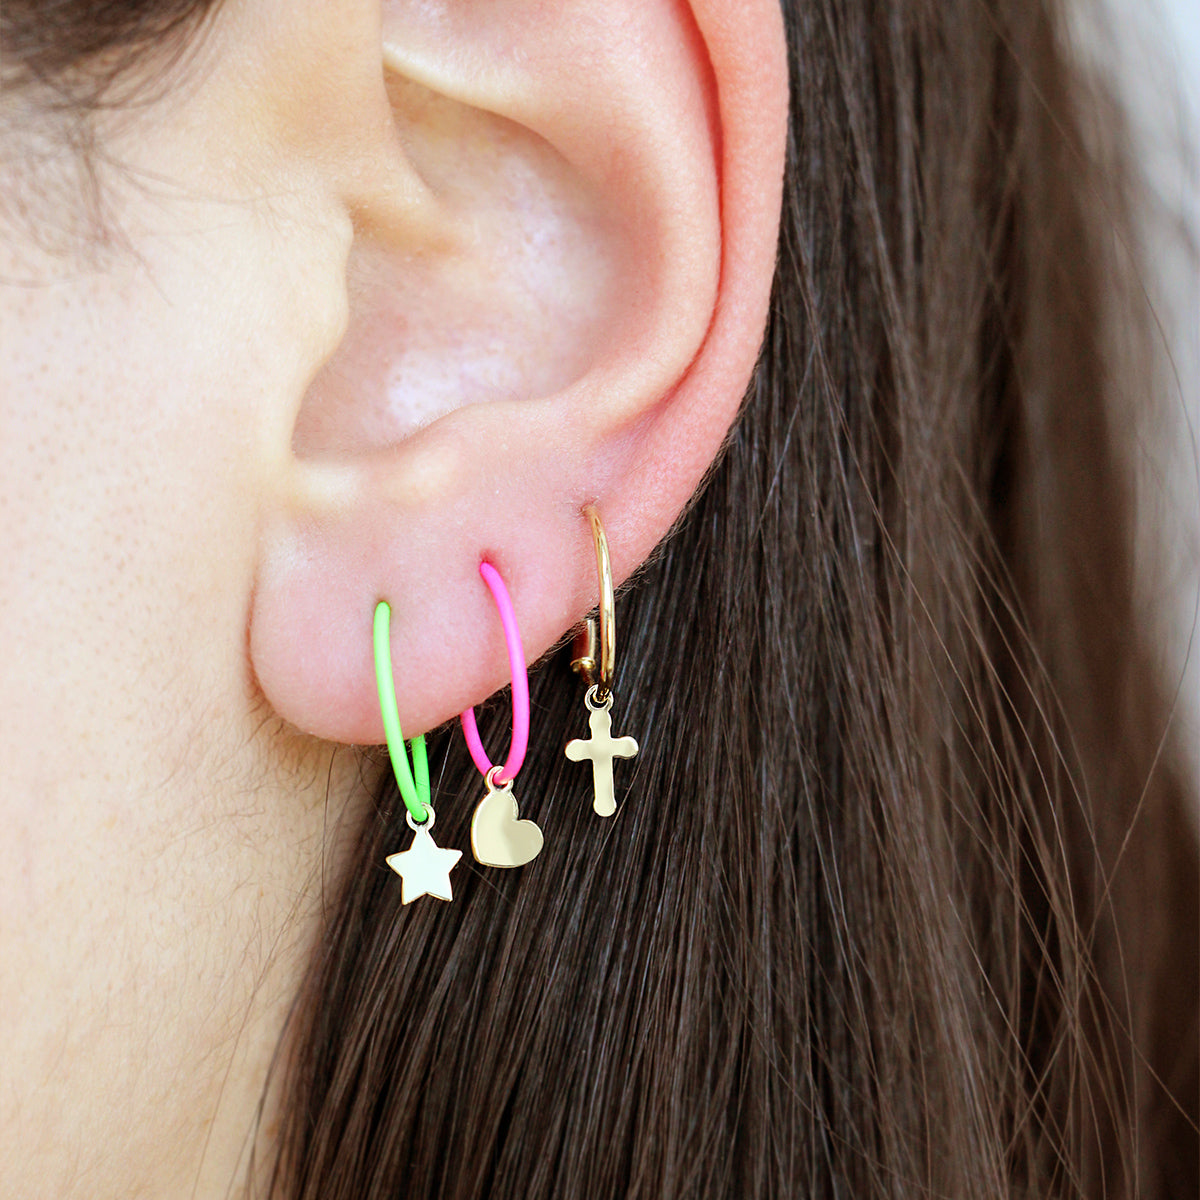 Earrings - Single earring with Star and painted hoop - ORO18KT - 4 | Rue des Mille